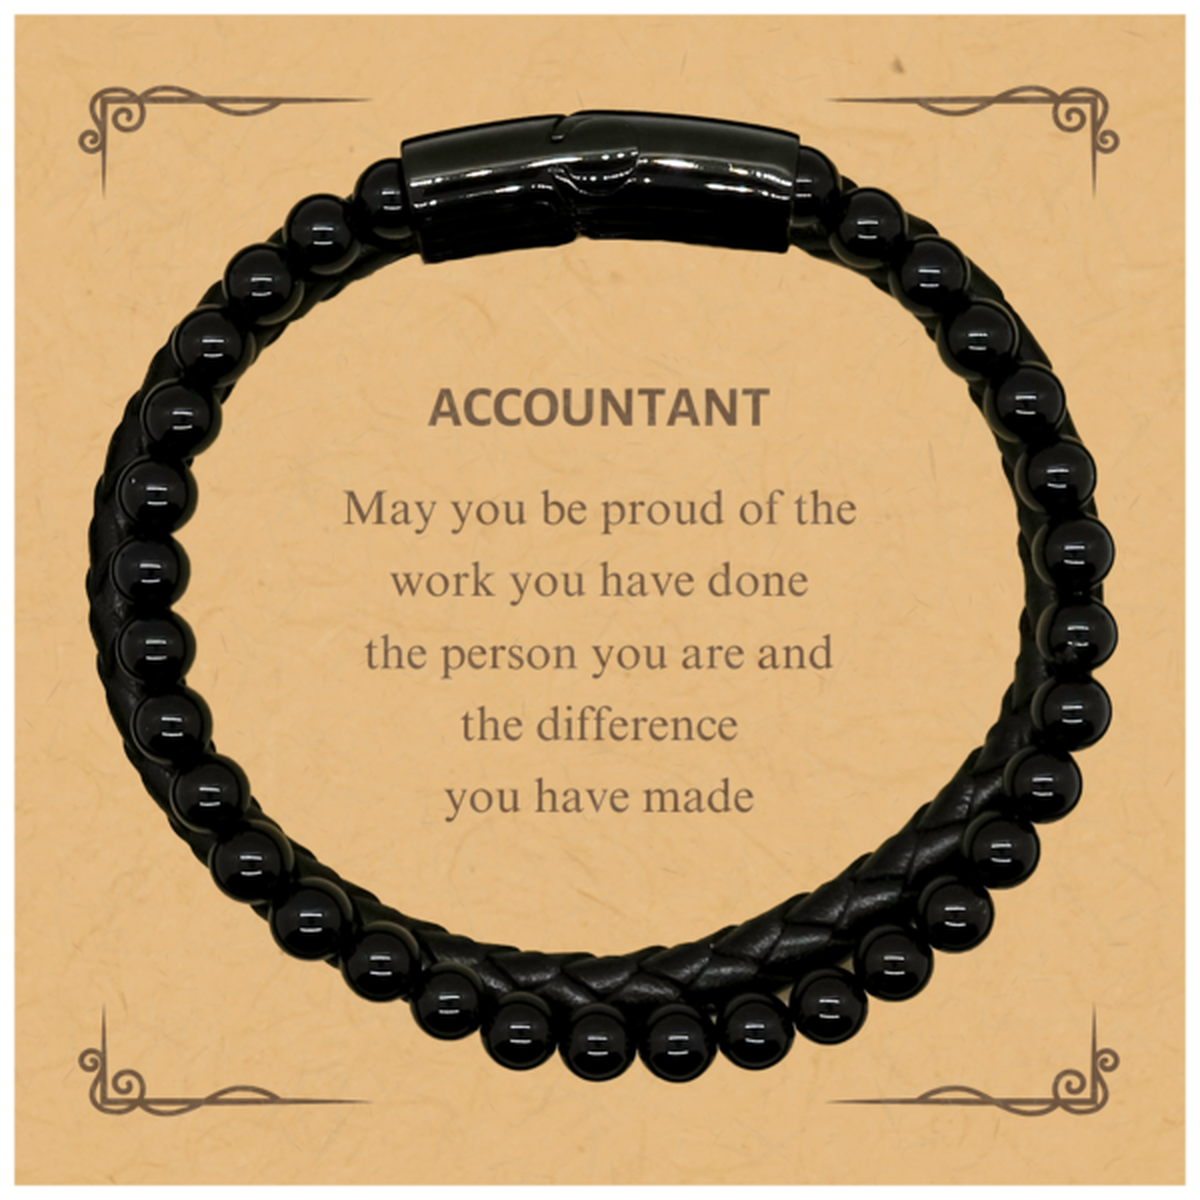 Accountant May you be proud of the work you have done, Retirement Accountant Stone Leather Bracelets for Colleague Appreciation Gifts Amazing for Accountant